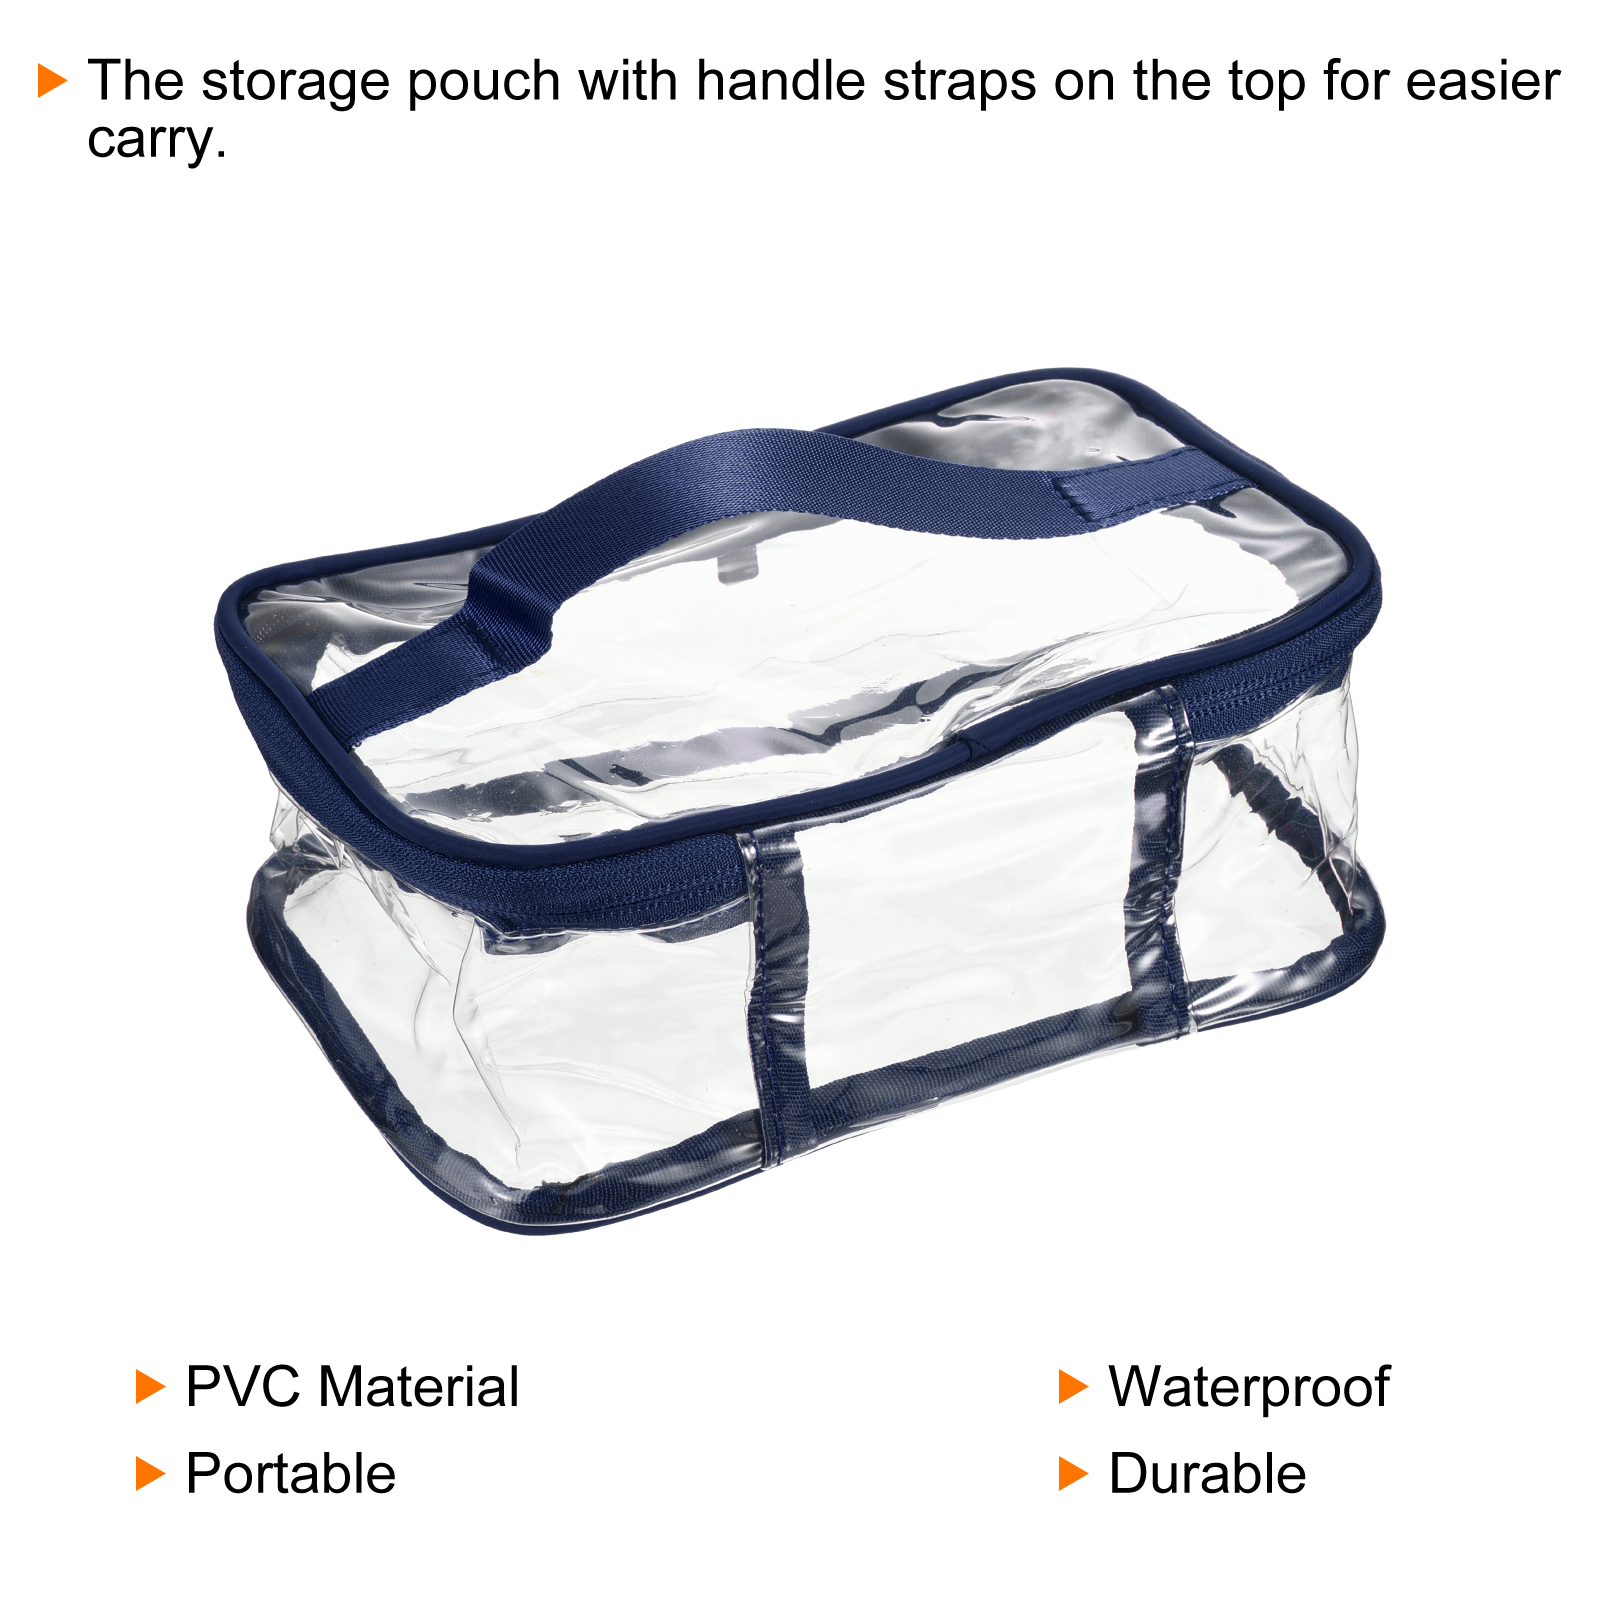 Uxcell PVC Clear Toiletry Bag Makeup Pouch with Zipper Handle, Black, Navy Blue 1 Set/2 Pack - image 5 of 6